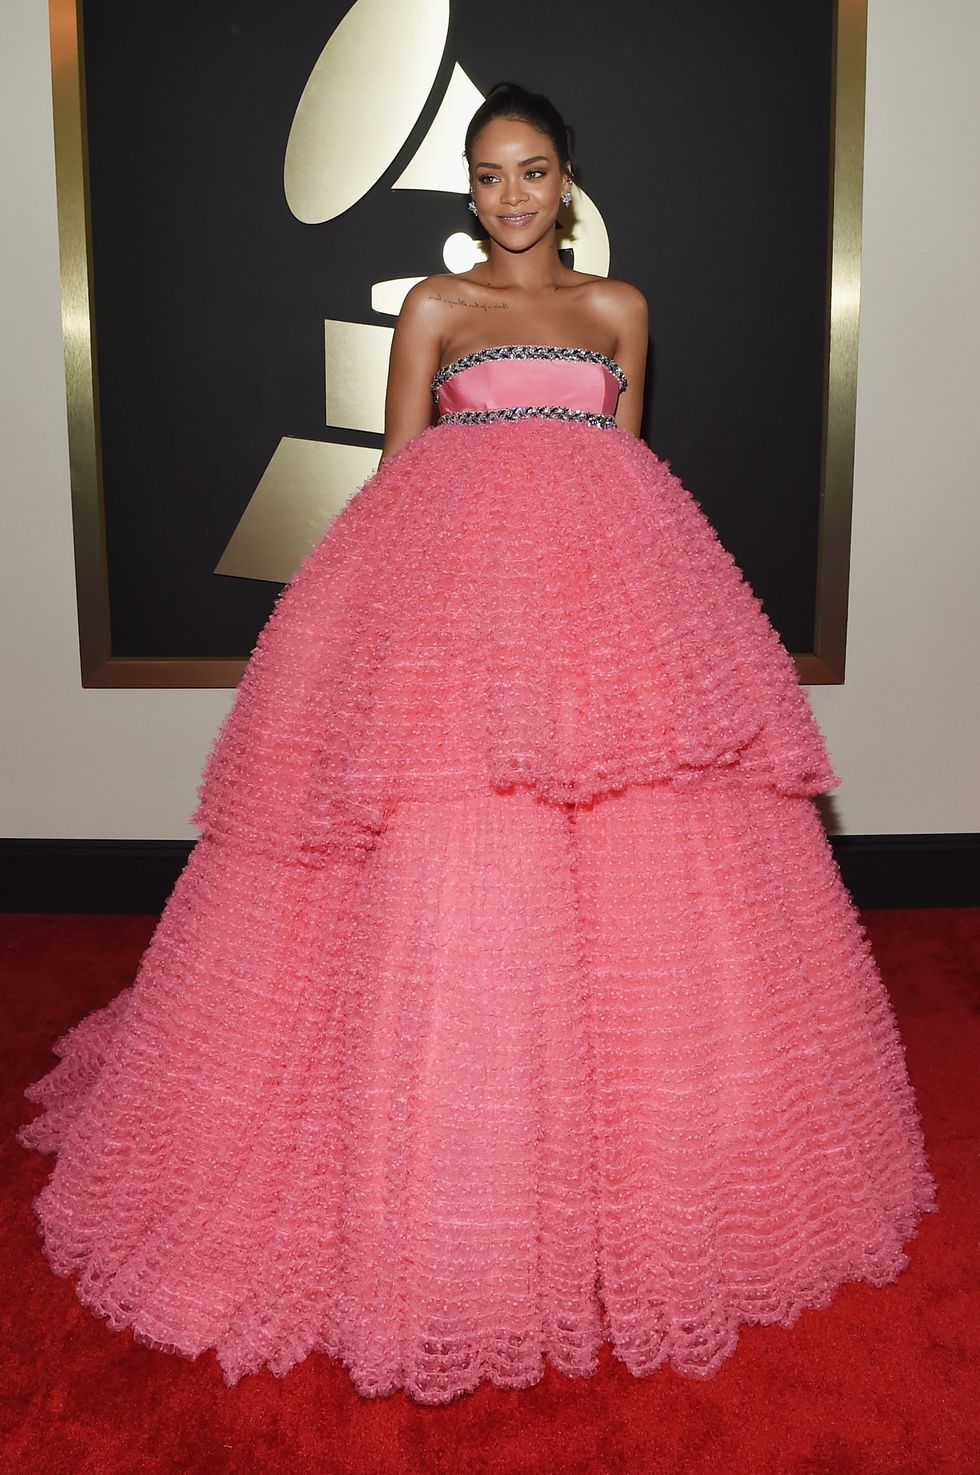 Rihanna at the 2015 Grammy Awards in a huge pink dress